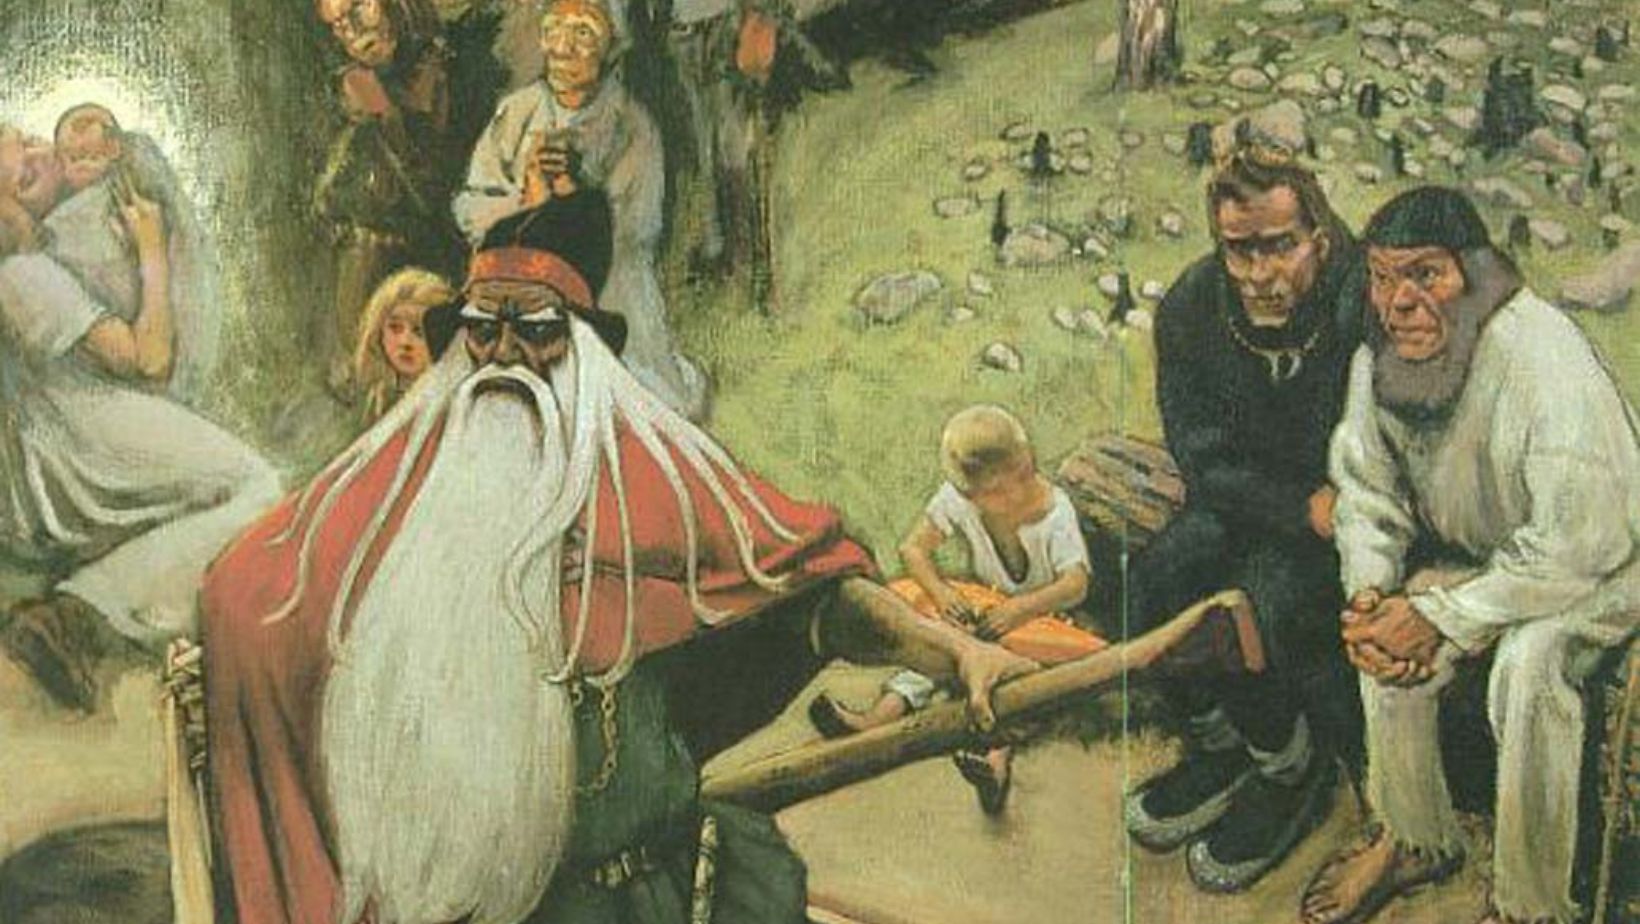 The Magical Sampo in Finnish Folklore